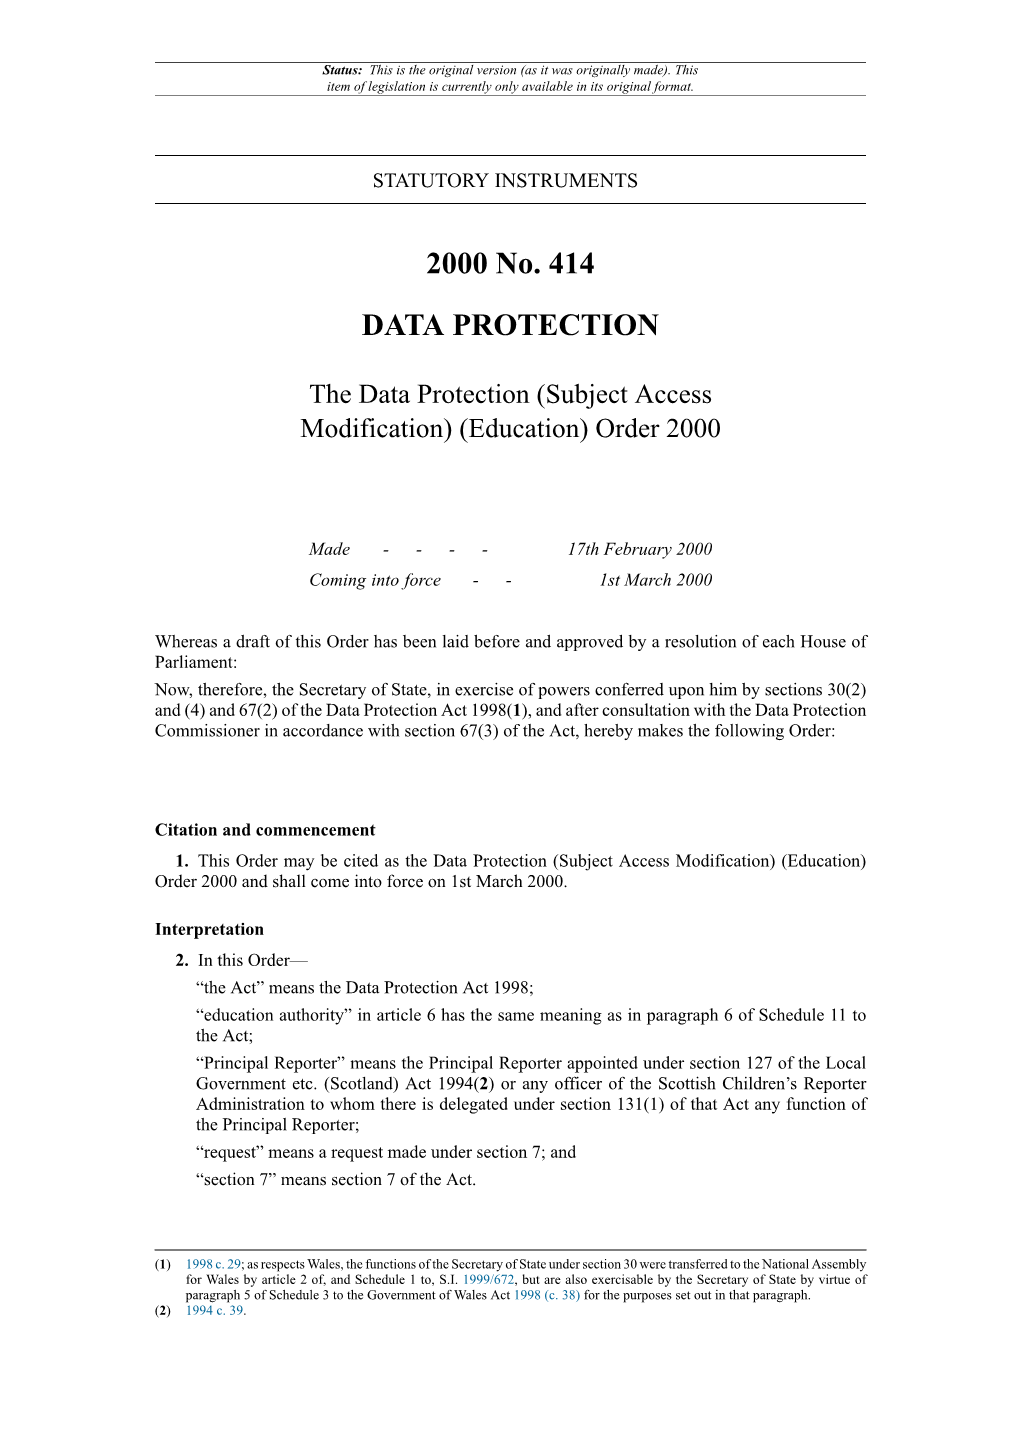 The Data Protection (Subject Access Modification) (Education) Order 2000